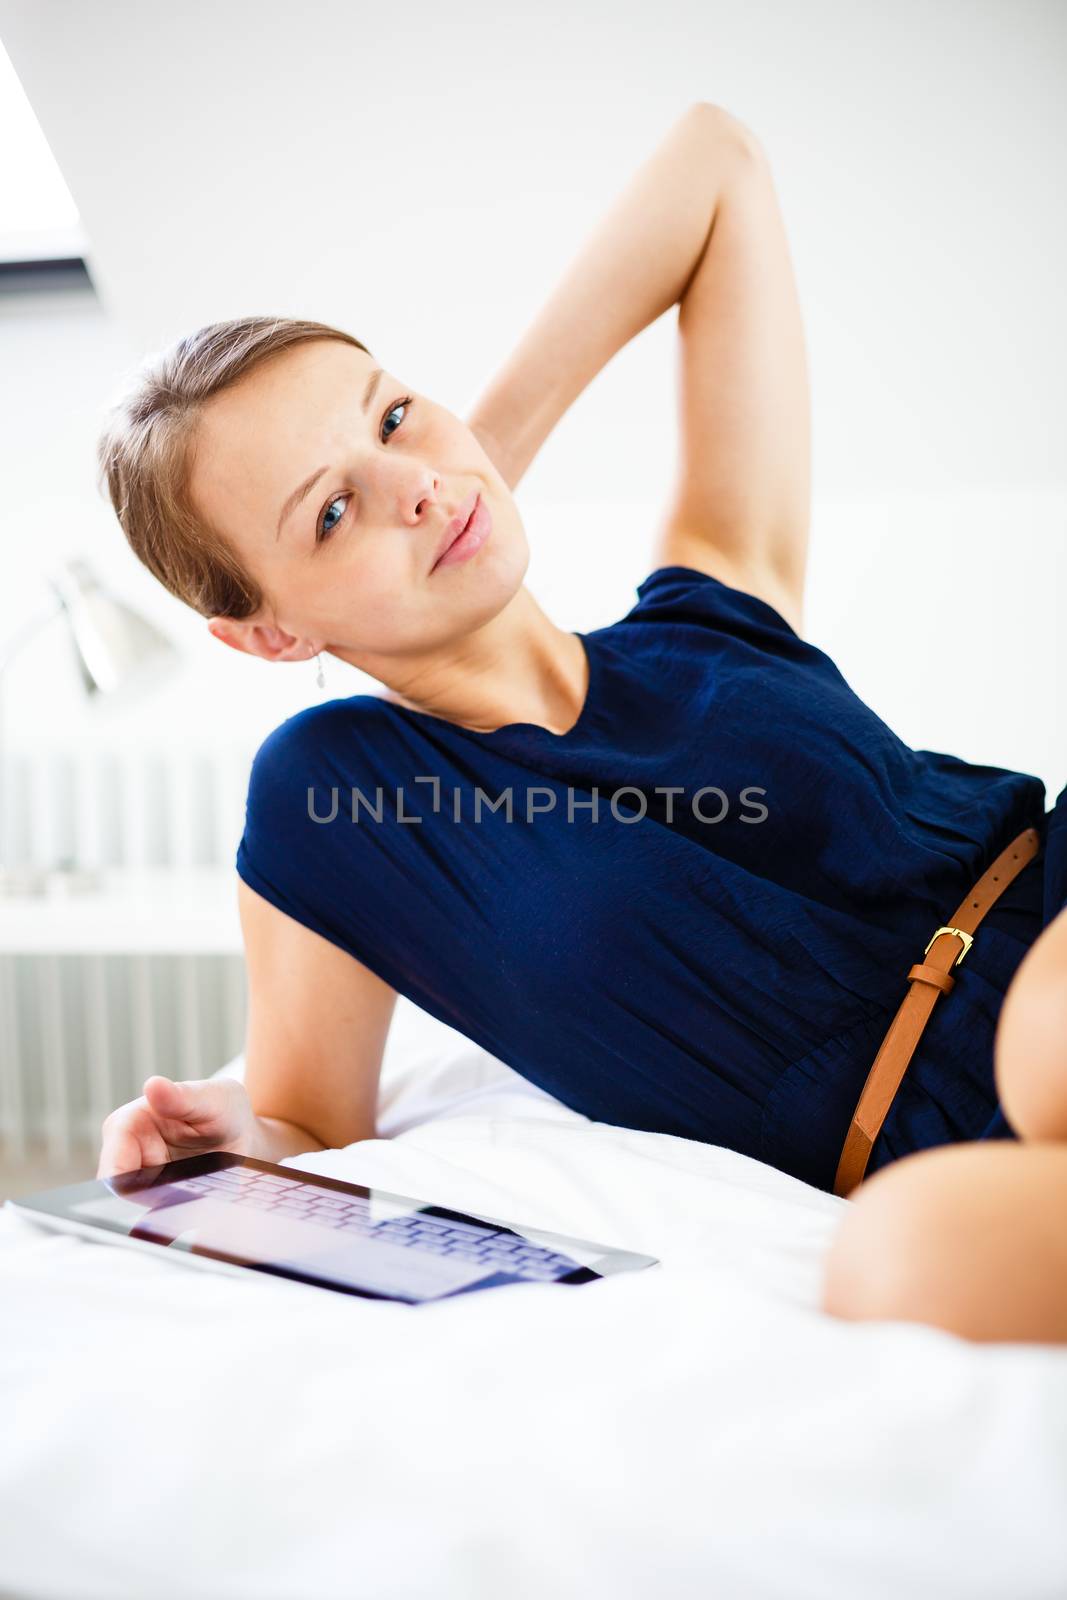 Pretty, young woman using her tablet computer in bed, after coming home from work (shallow DOF; color toned image)